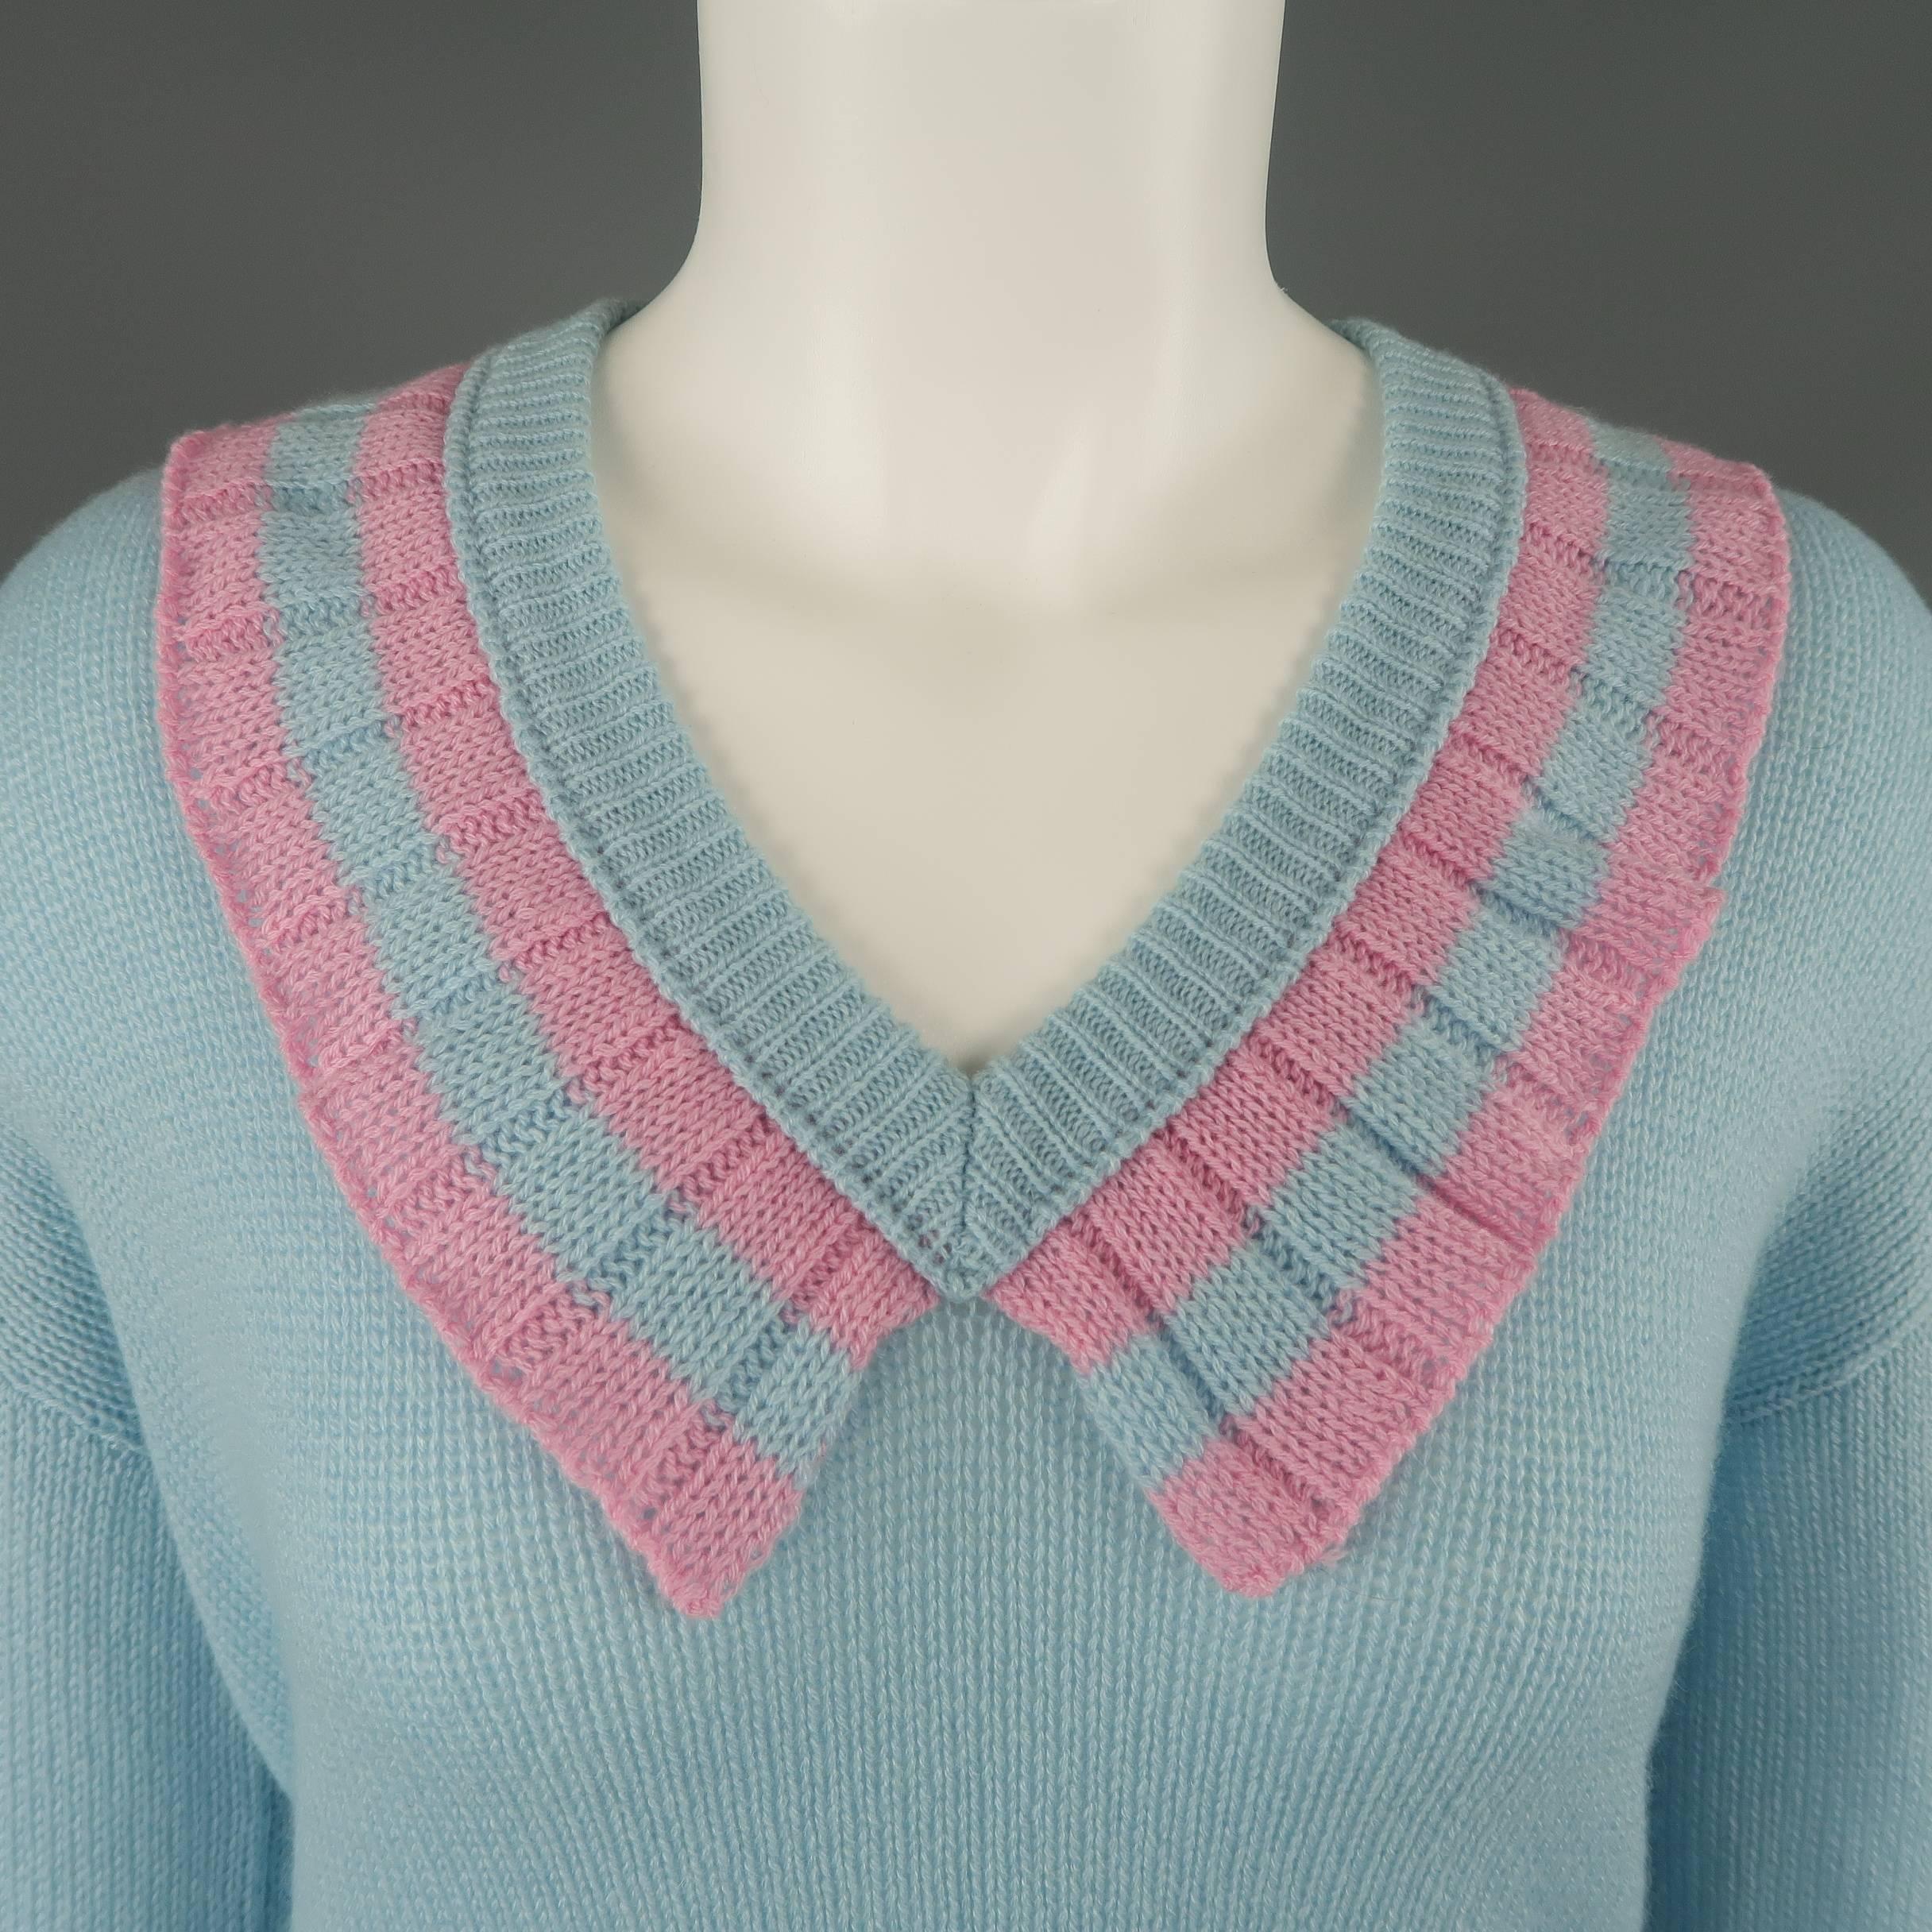 Prada pullover sweater comes in light blue cashmere with an oversized fit and V neck with pink striped riffle collar trim. Made in Italy.
 
Good Pre-Owned Condition.
Marked: IT 38
Retails at: $1,080.00
 
Measurements:
 
Shoulder: 20 in.
Bust: 40